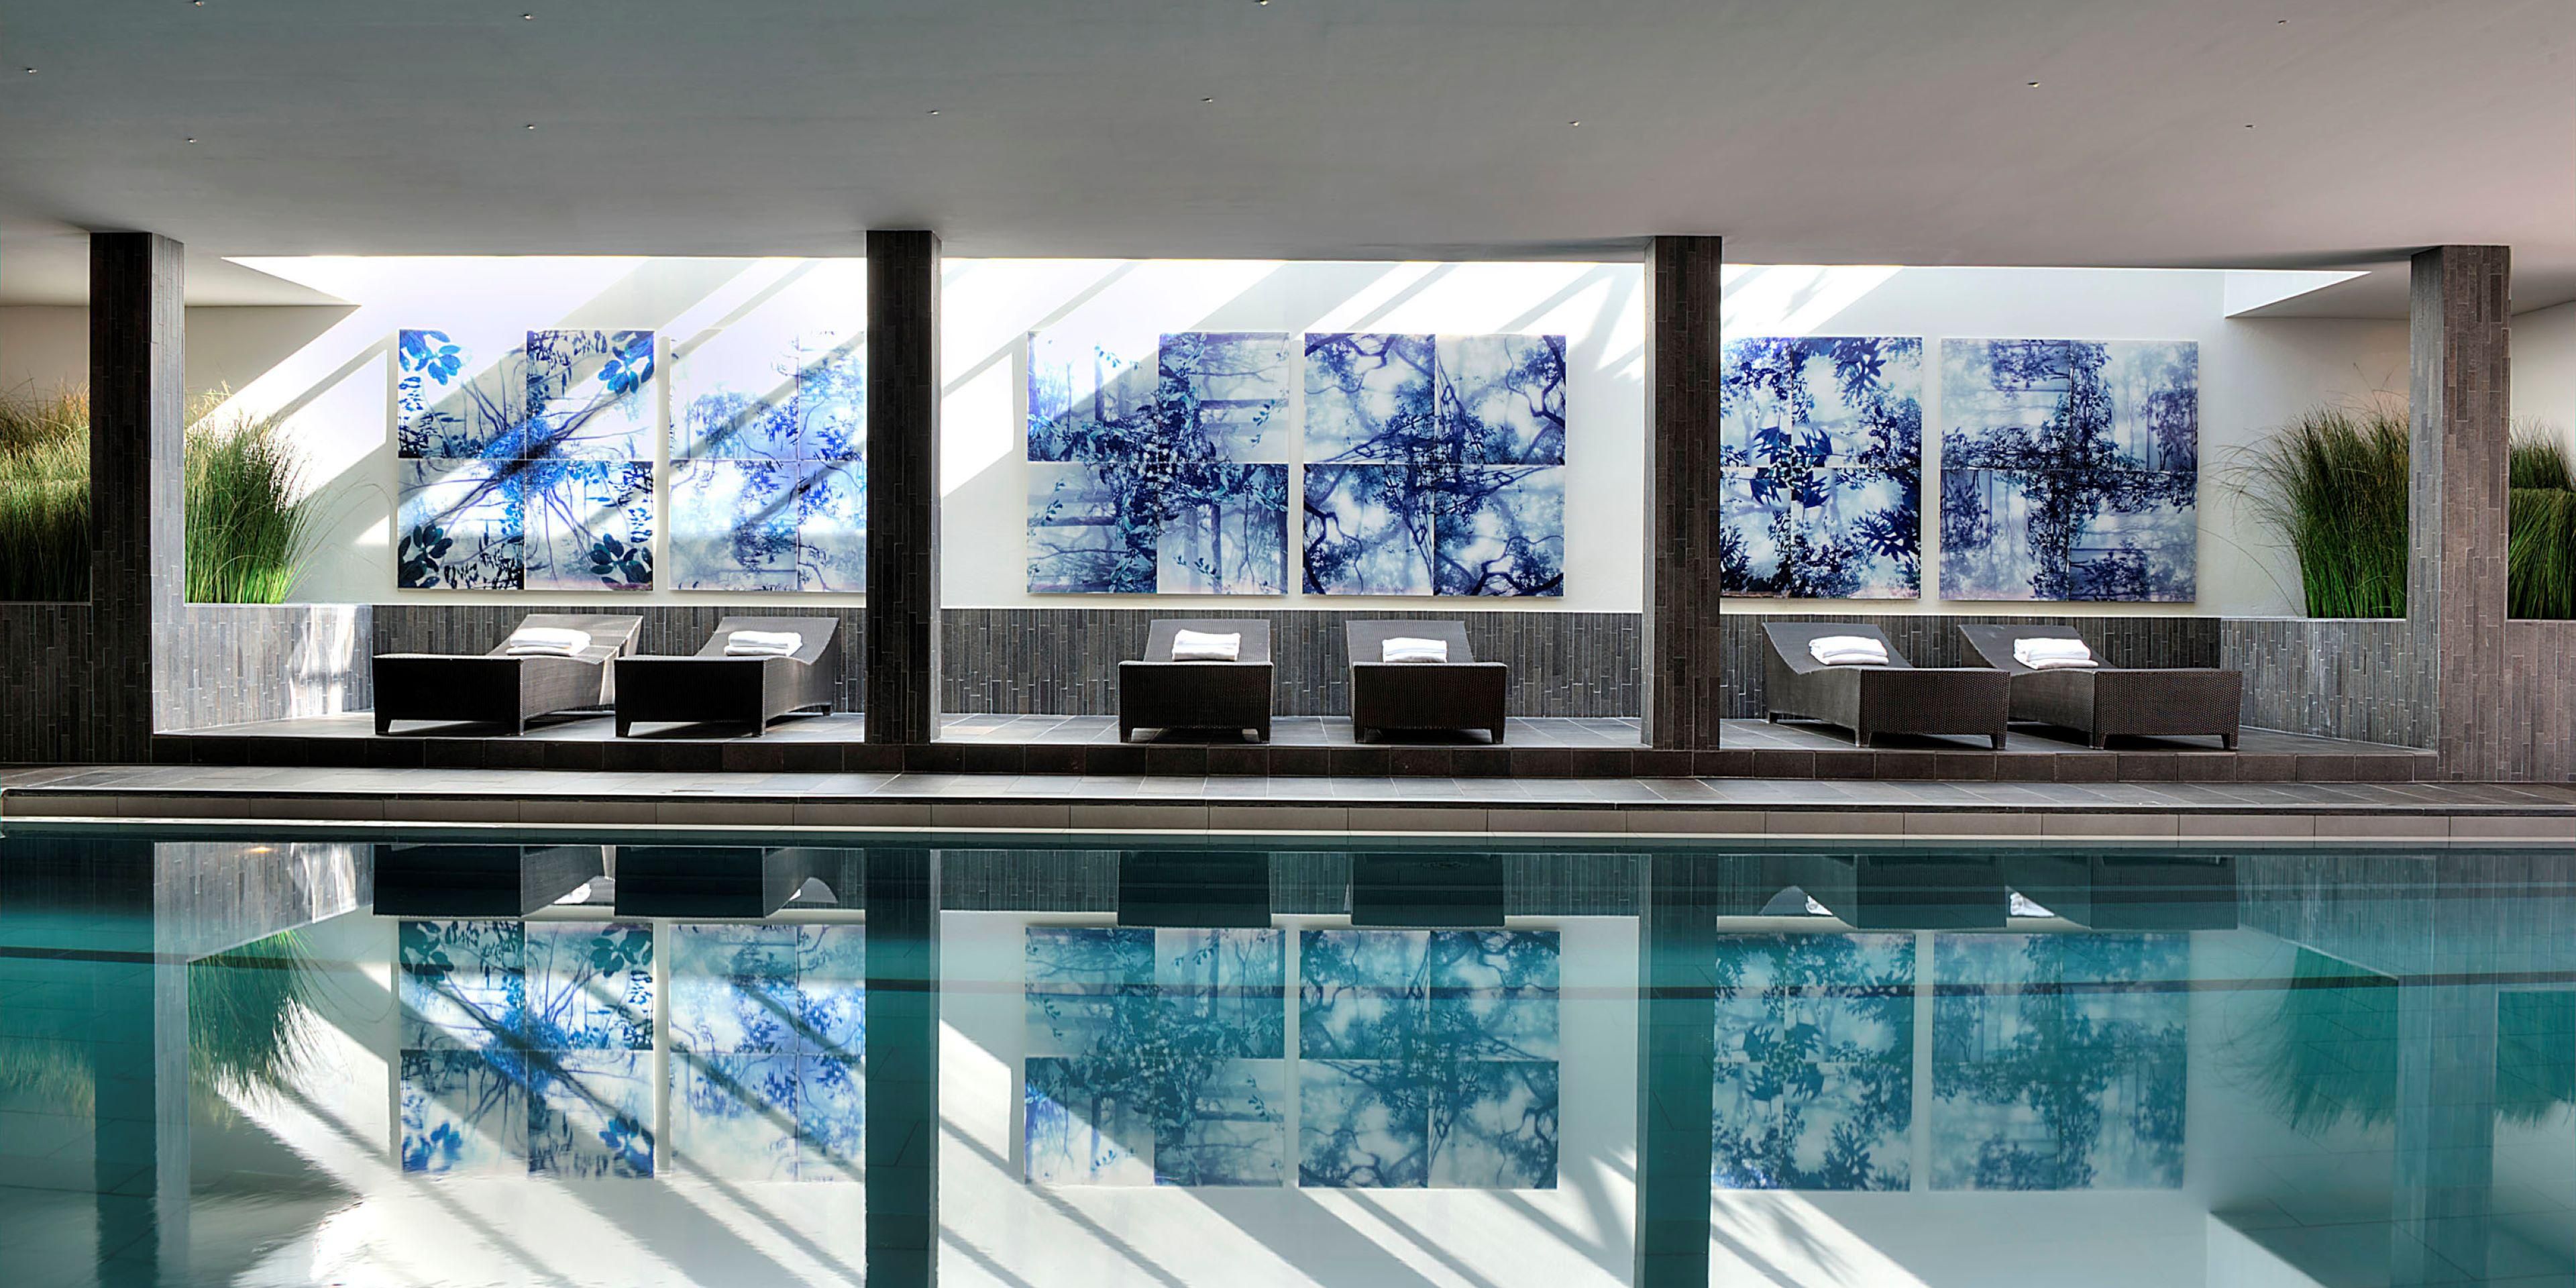 Embrace winter's charm at the Geneva Country Club. Enjoy heated indoor pool facilities plus access to the tennis courts, compliments of the InterContinental Genève. Our concierge will gladly arrange seamless transfers for your enjoyment.